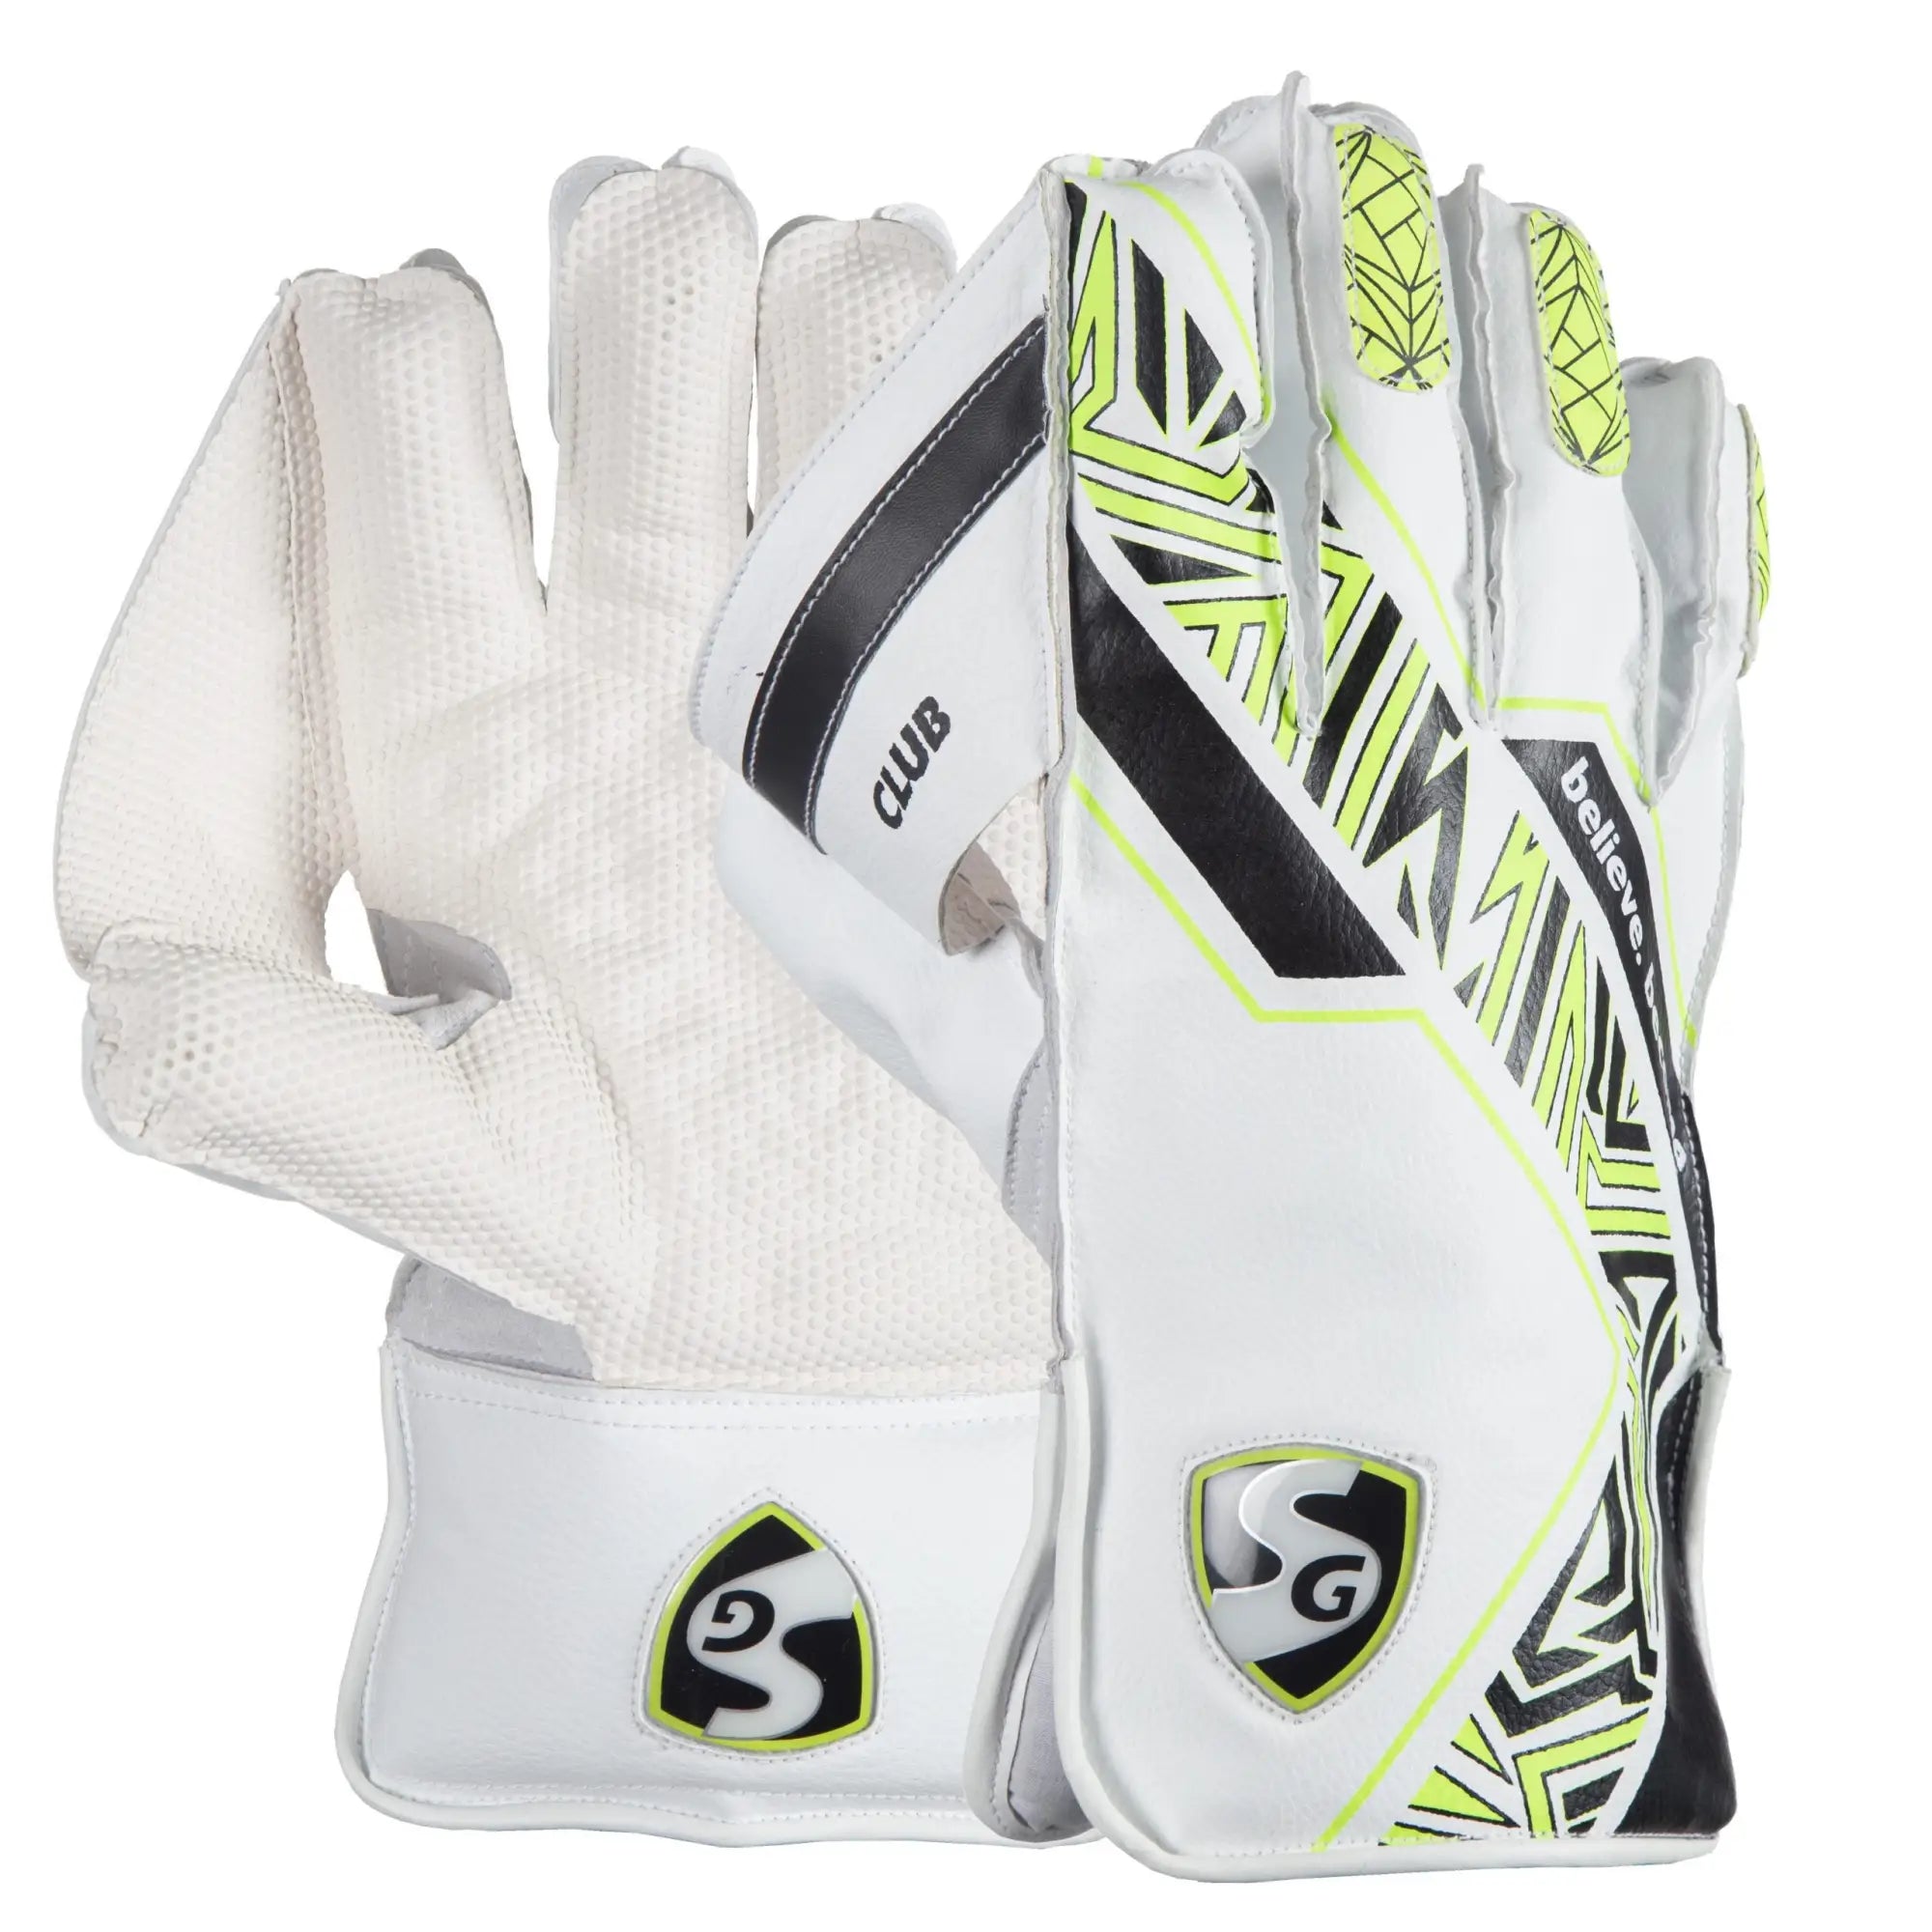 SG Wicket Keeping Gloves - RSD Prolite, Cricket Accessories Best Gift for  Him